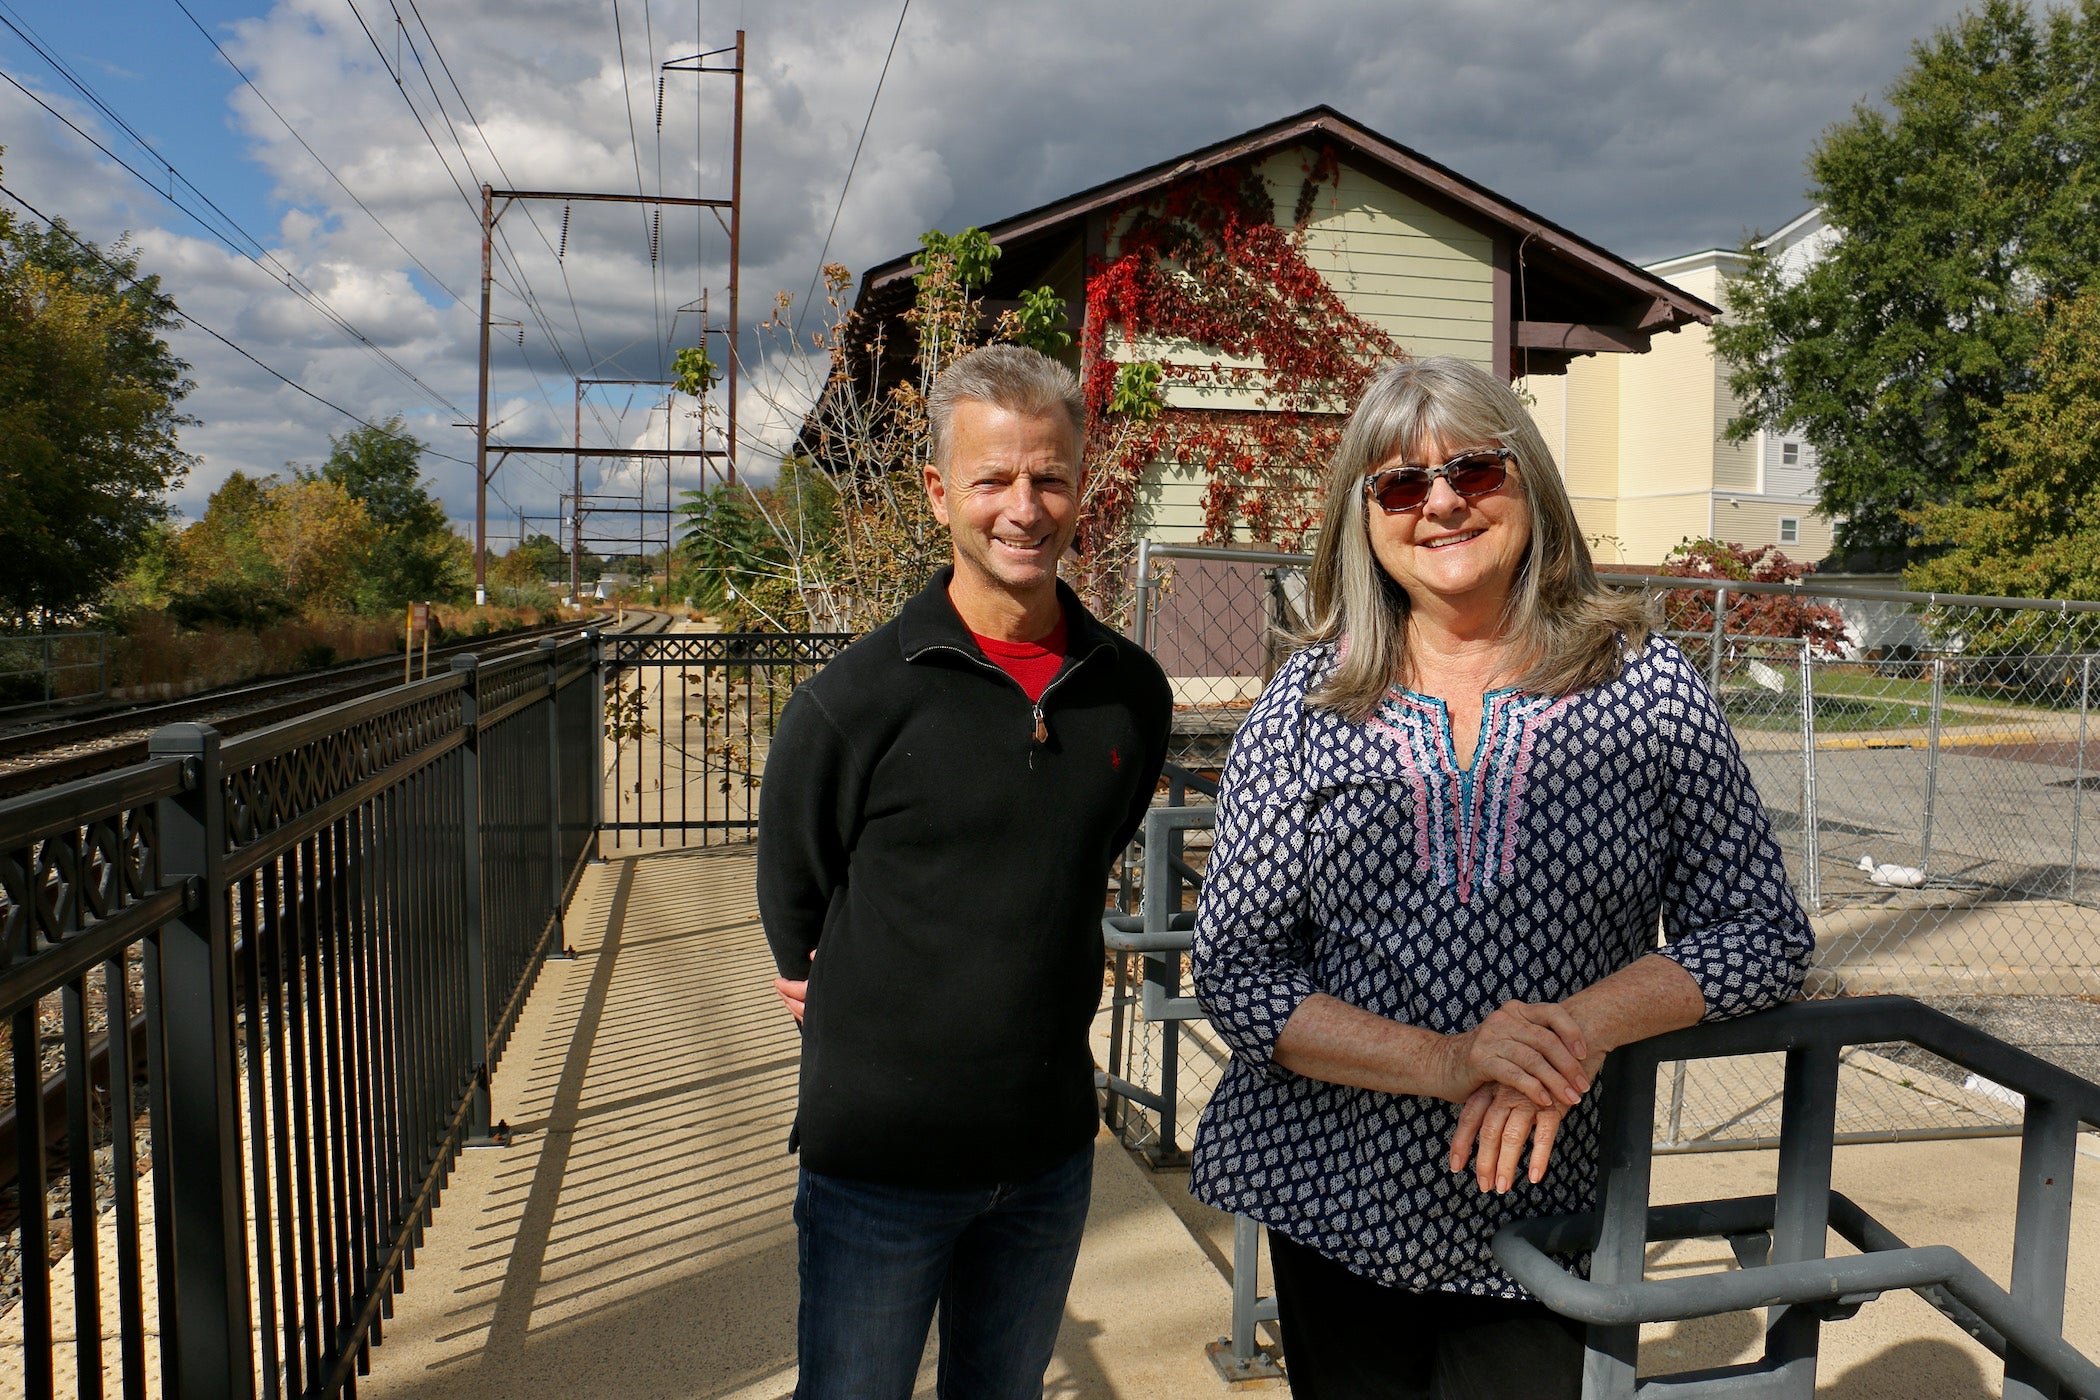 Joe Langella, vice president of the Wissahickon Valley Historical Society, and Bernadette Dougherty pose beside the Ambler Freight Station